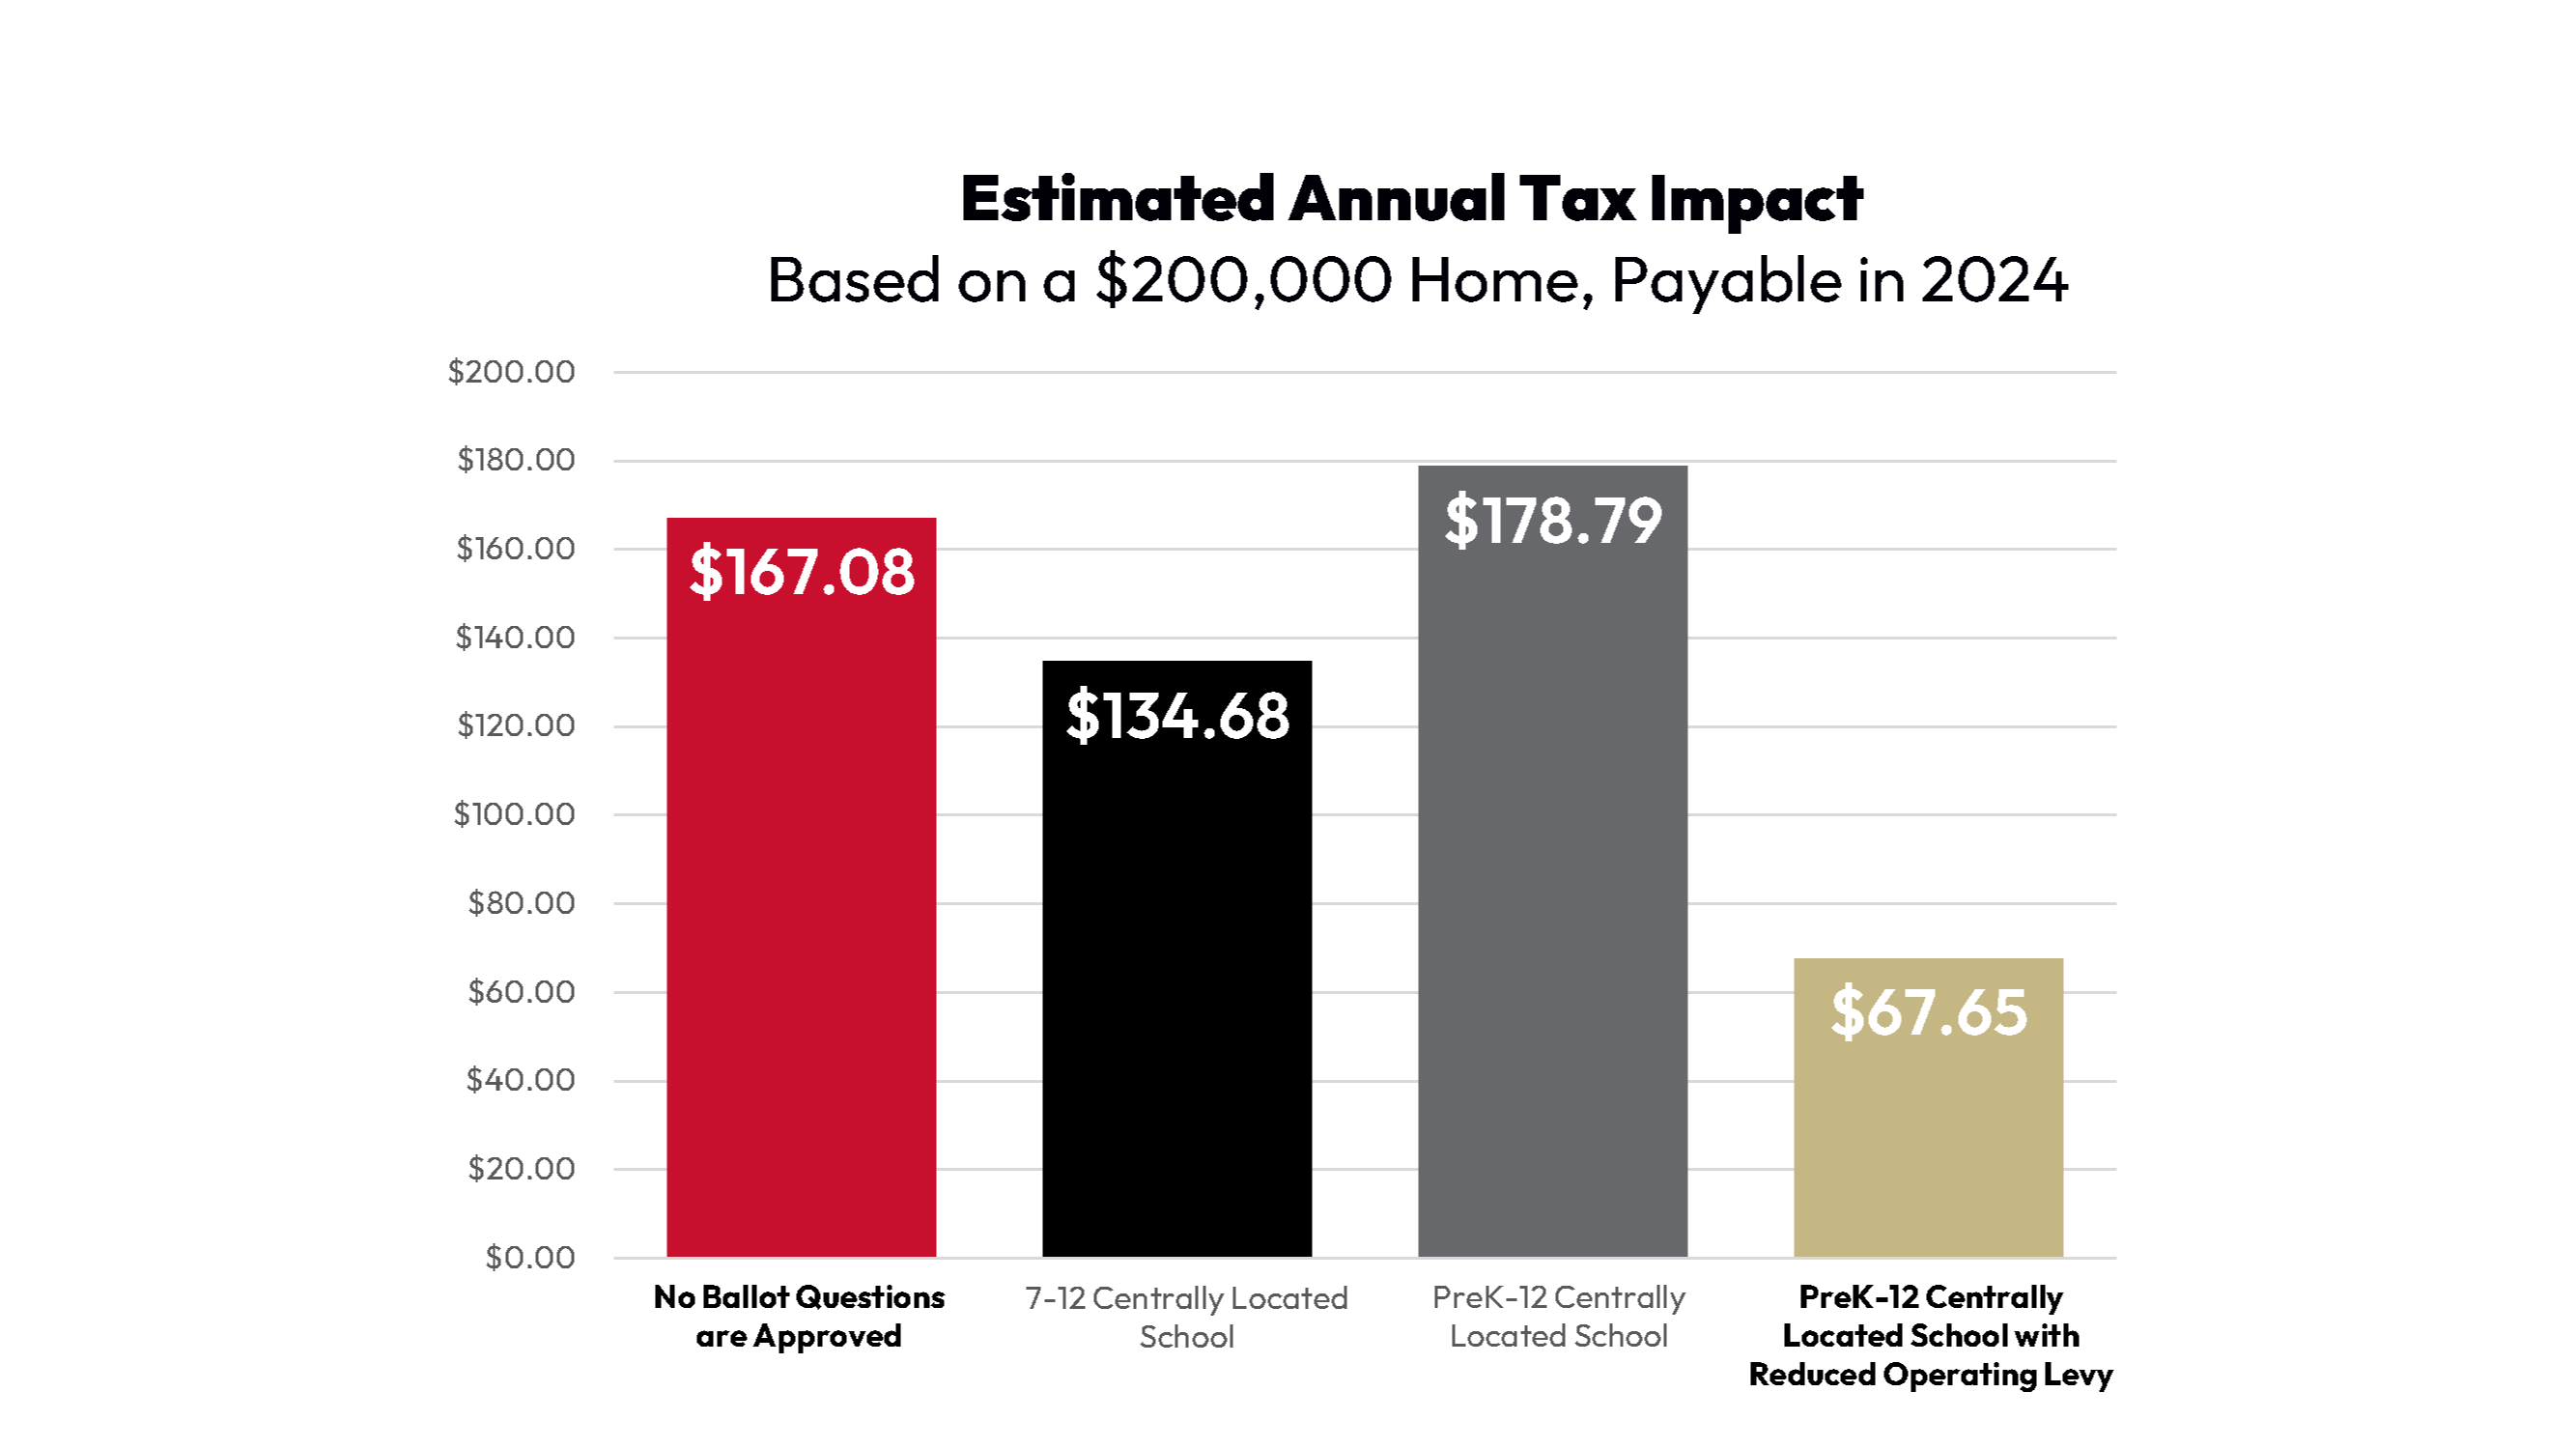 Tax impacts for projects vary